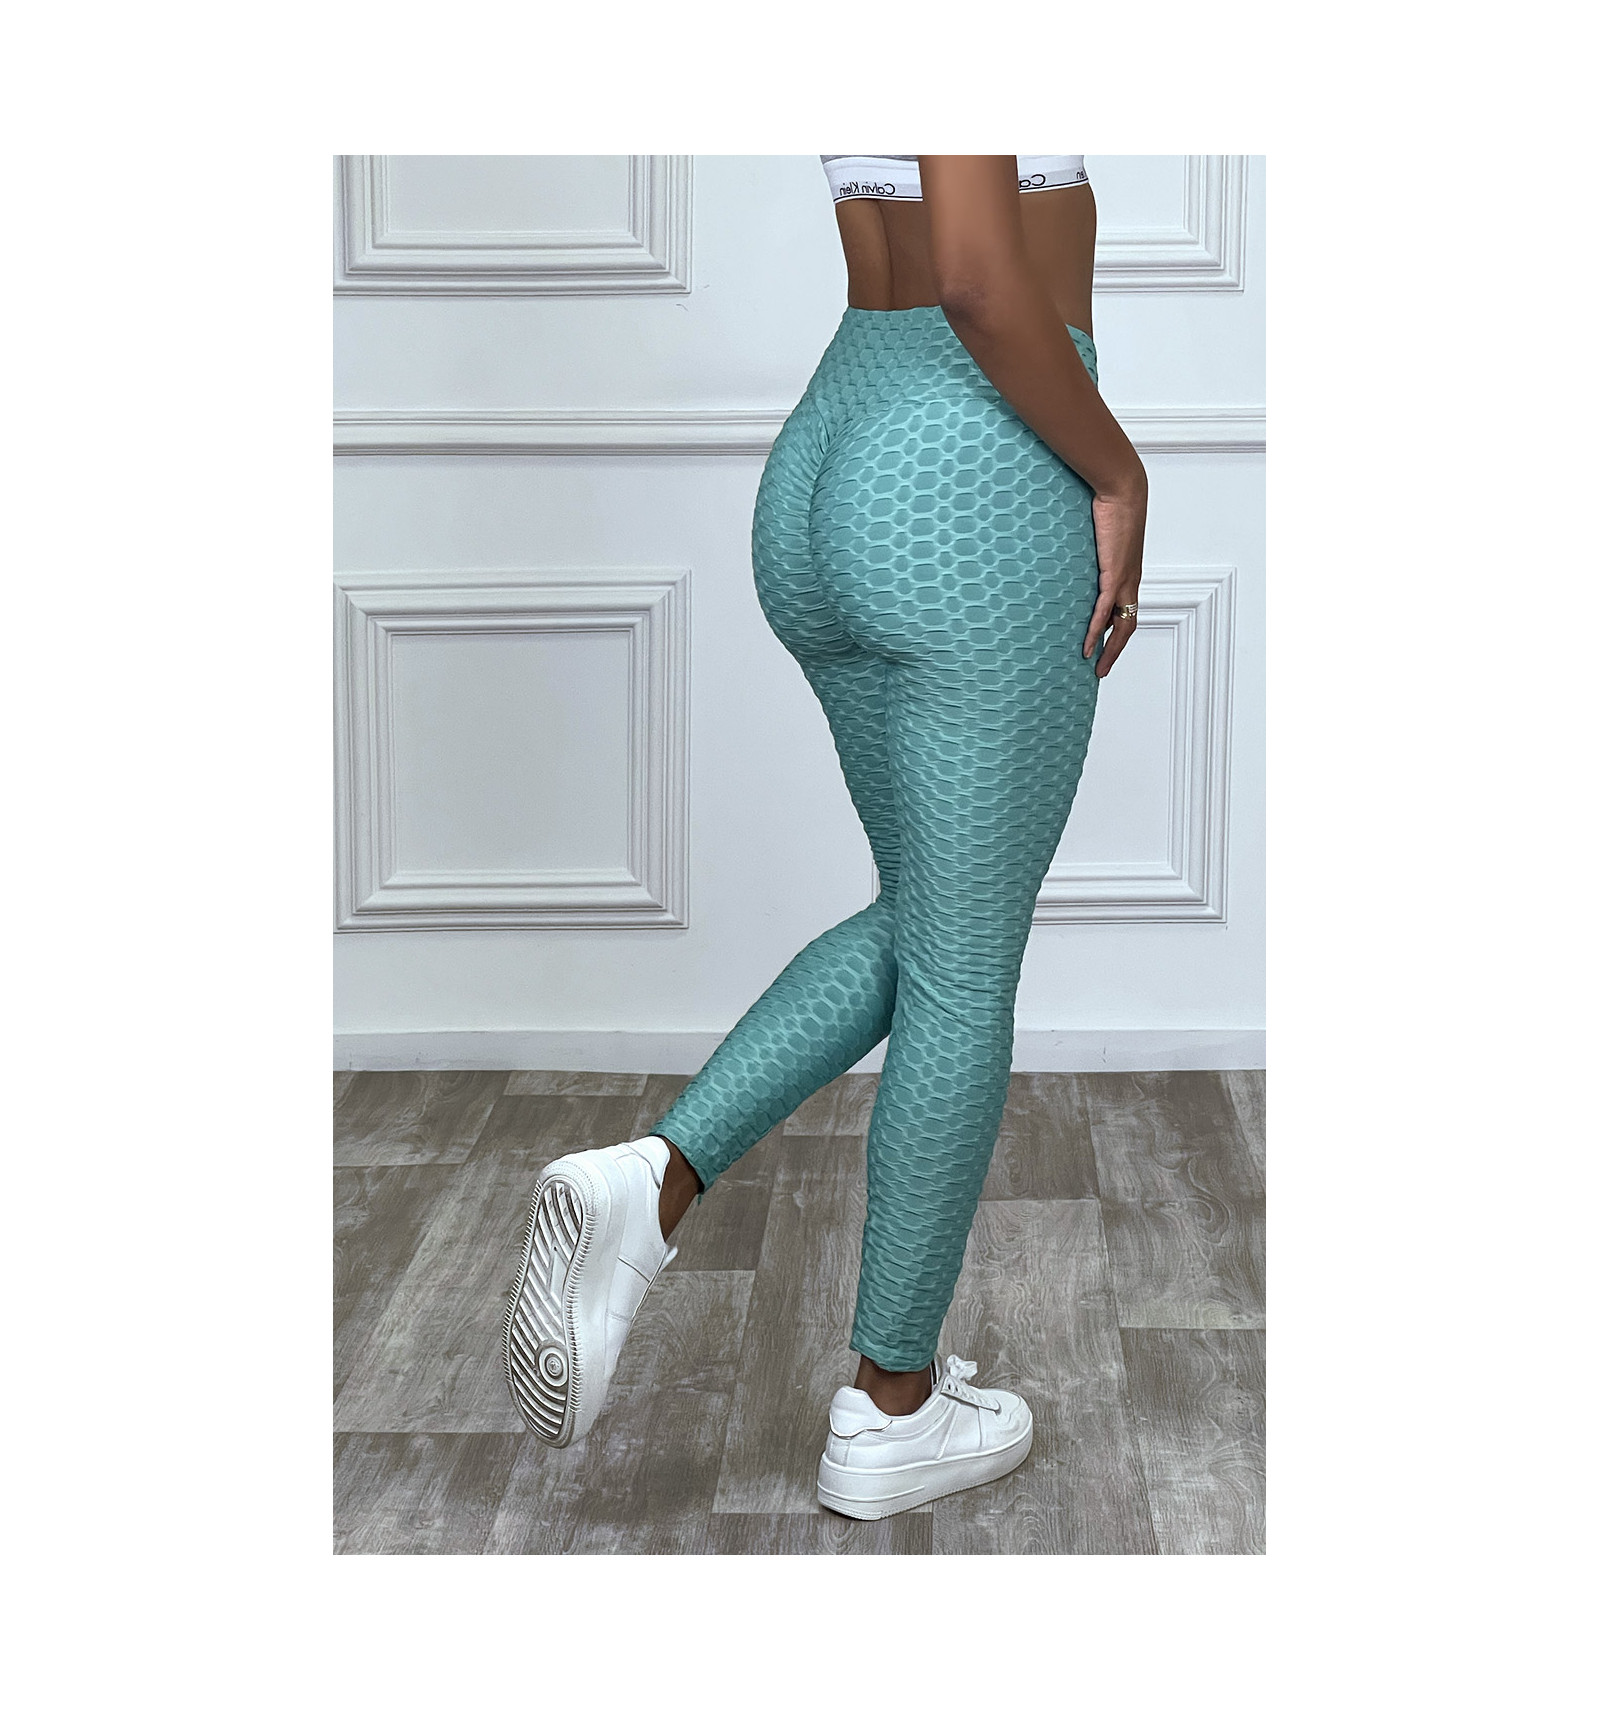 Ohmyshape Official Store, Anti-Cellulite Push-Up Leggings, Shopify Store  Listing